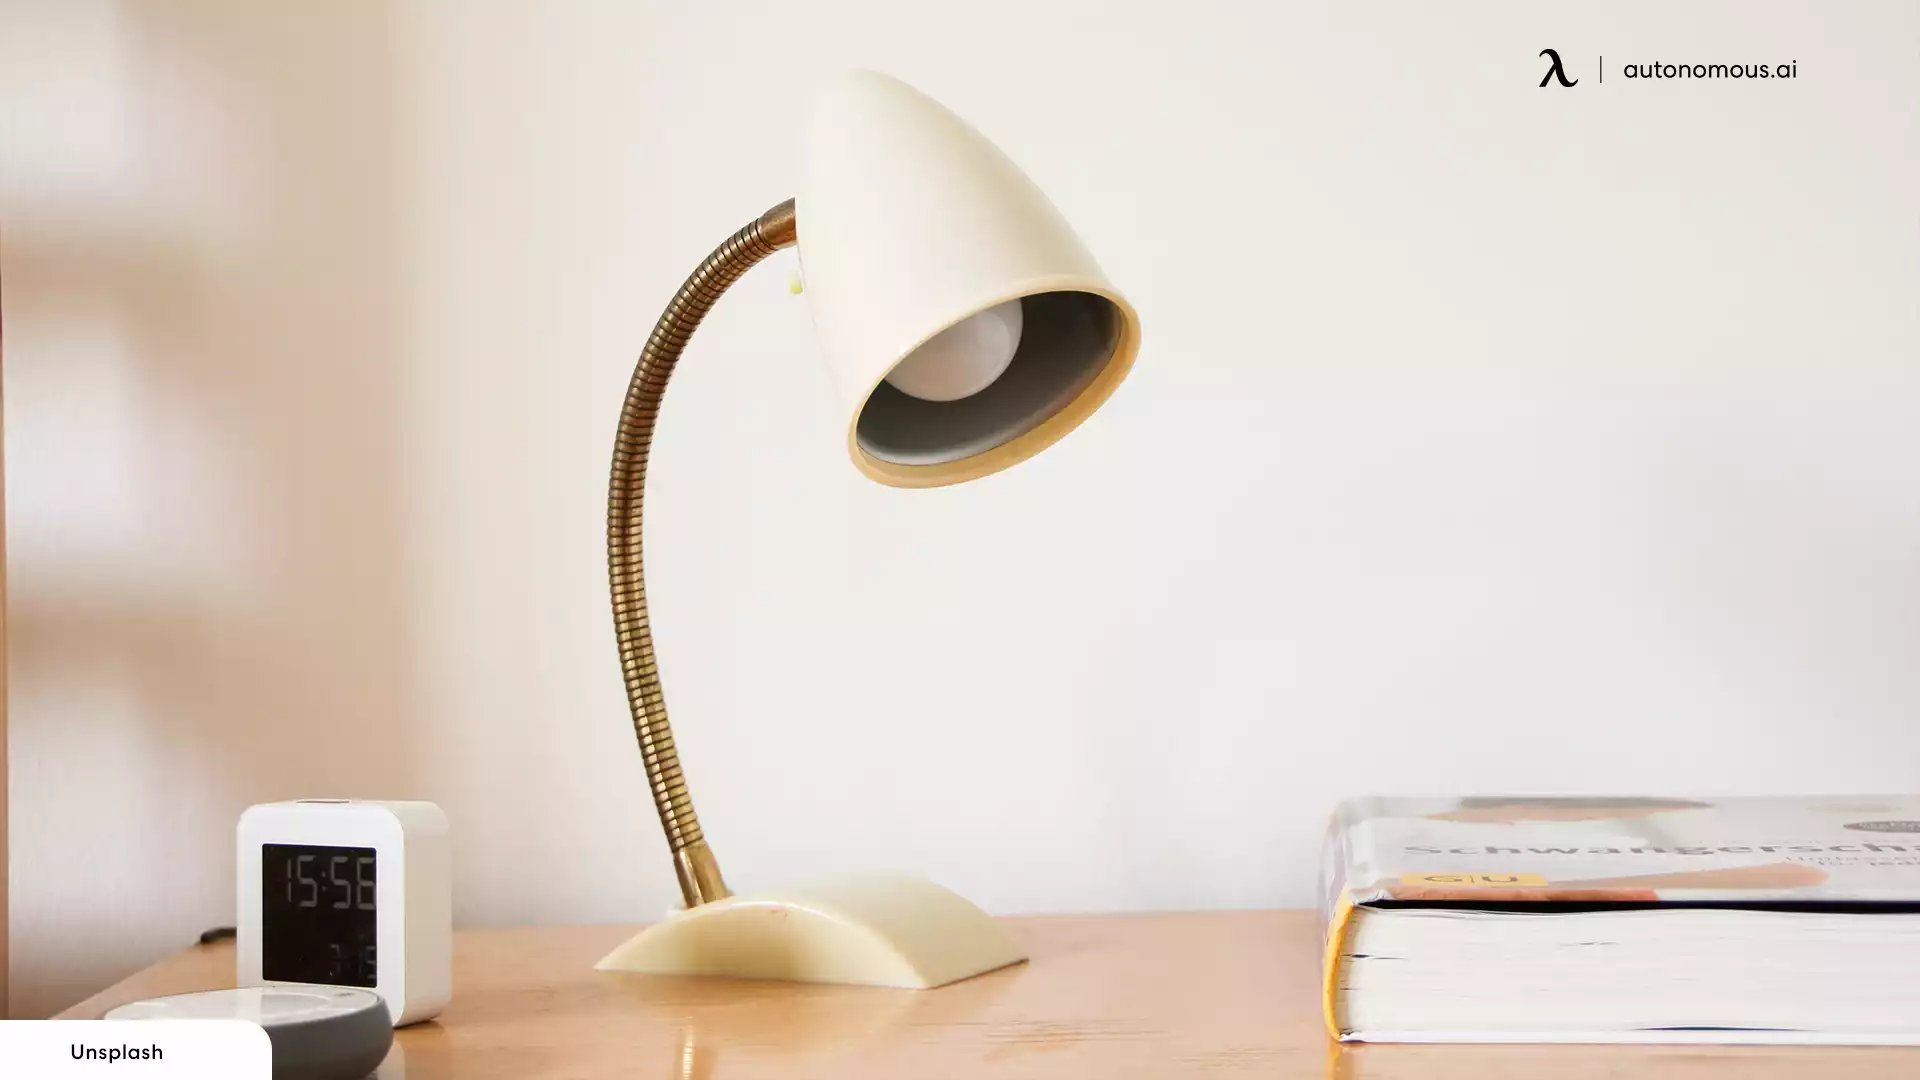 Place a good-looking desk lamp on your desk